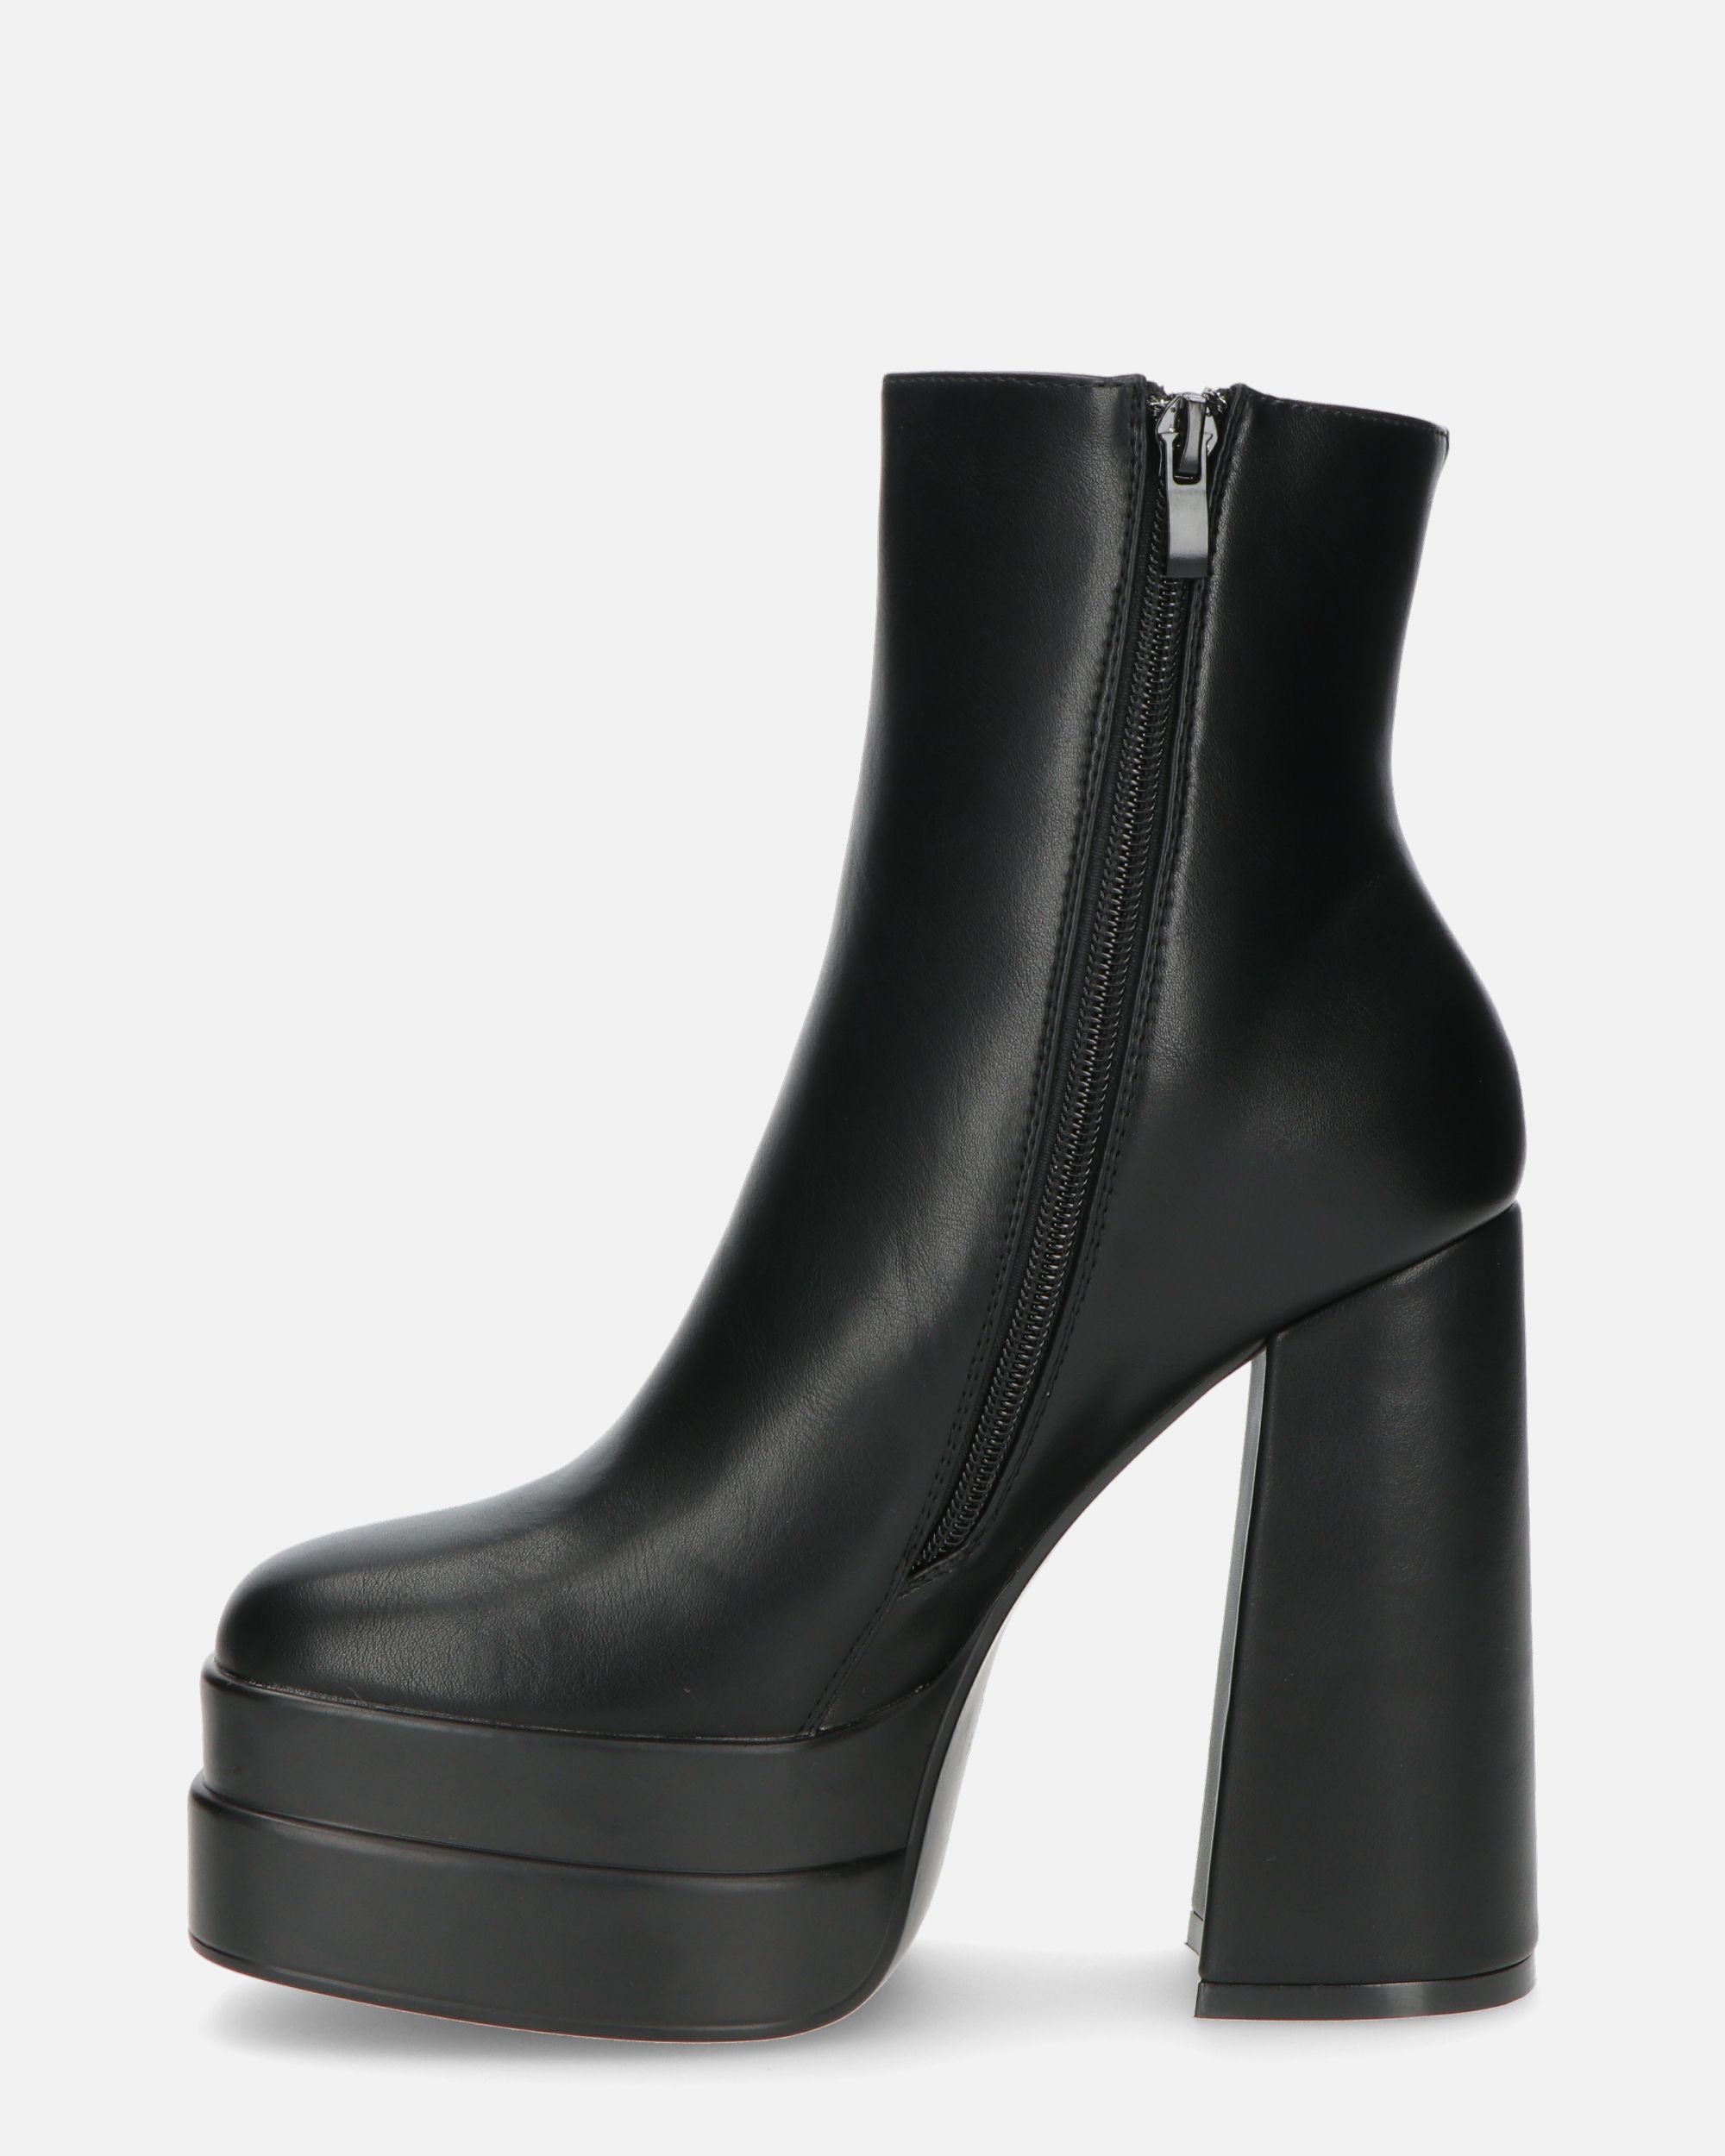 RINA - black PU ankle boots with heel